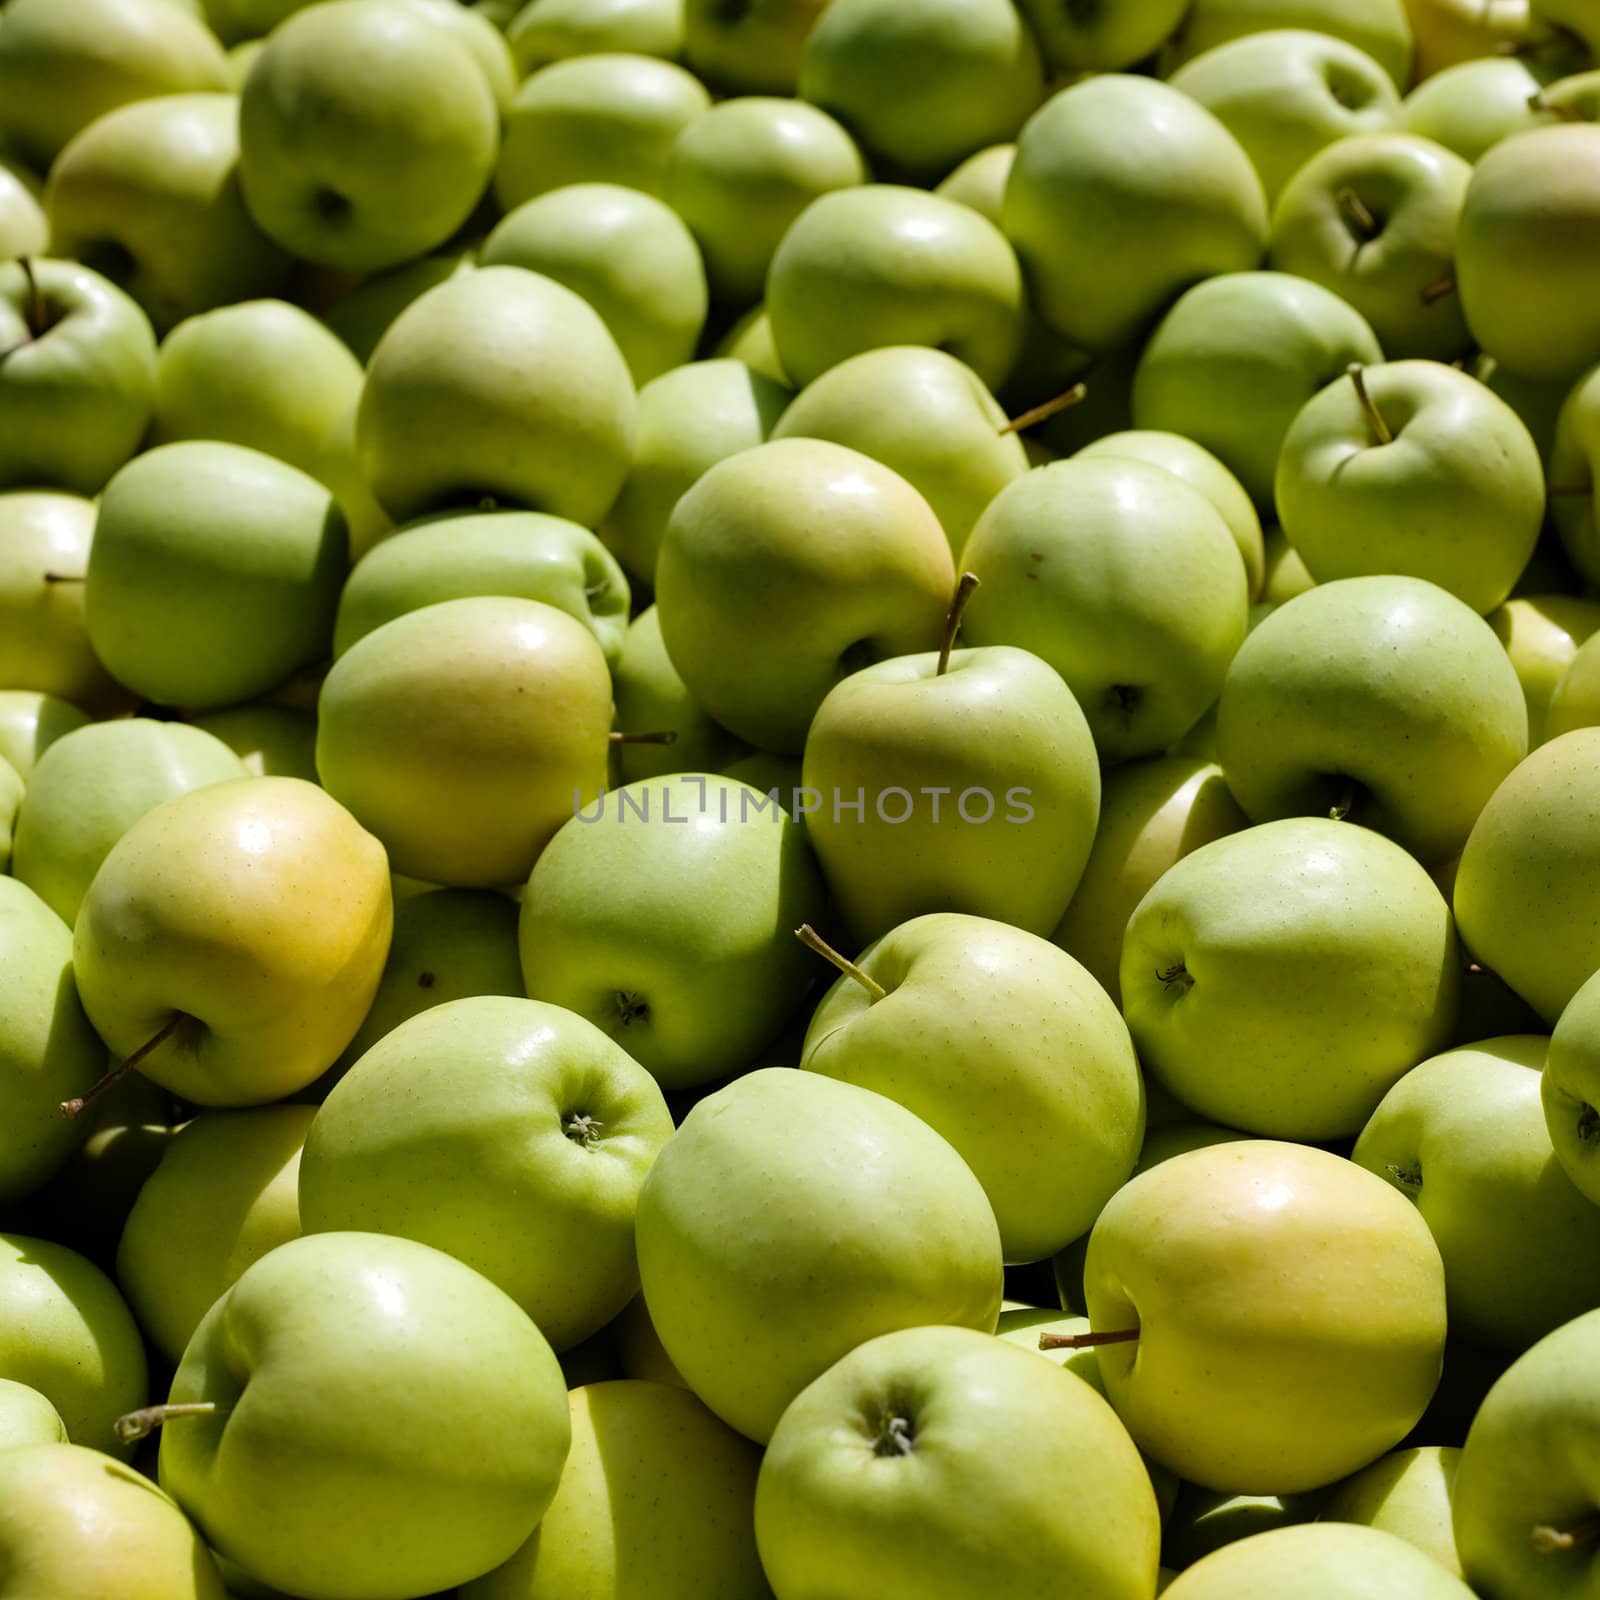 An image of a crop of green apples